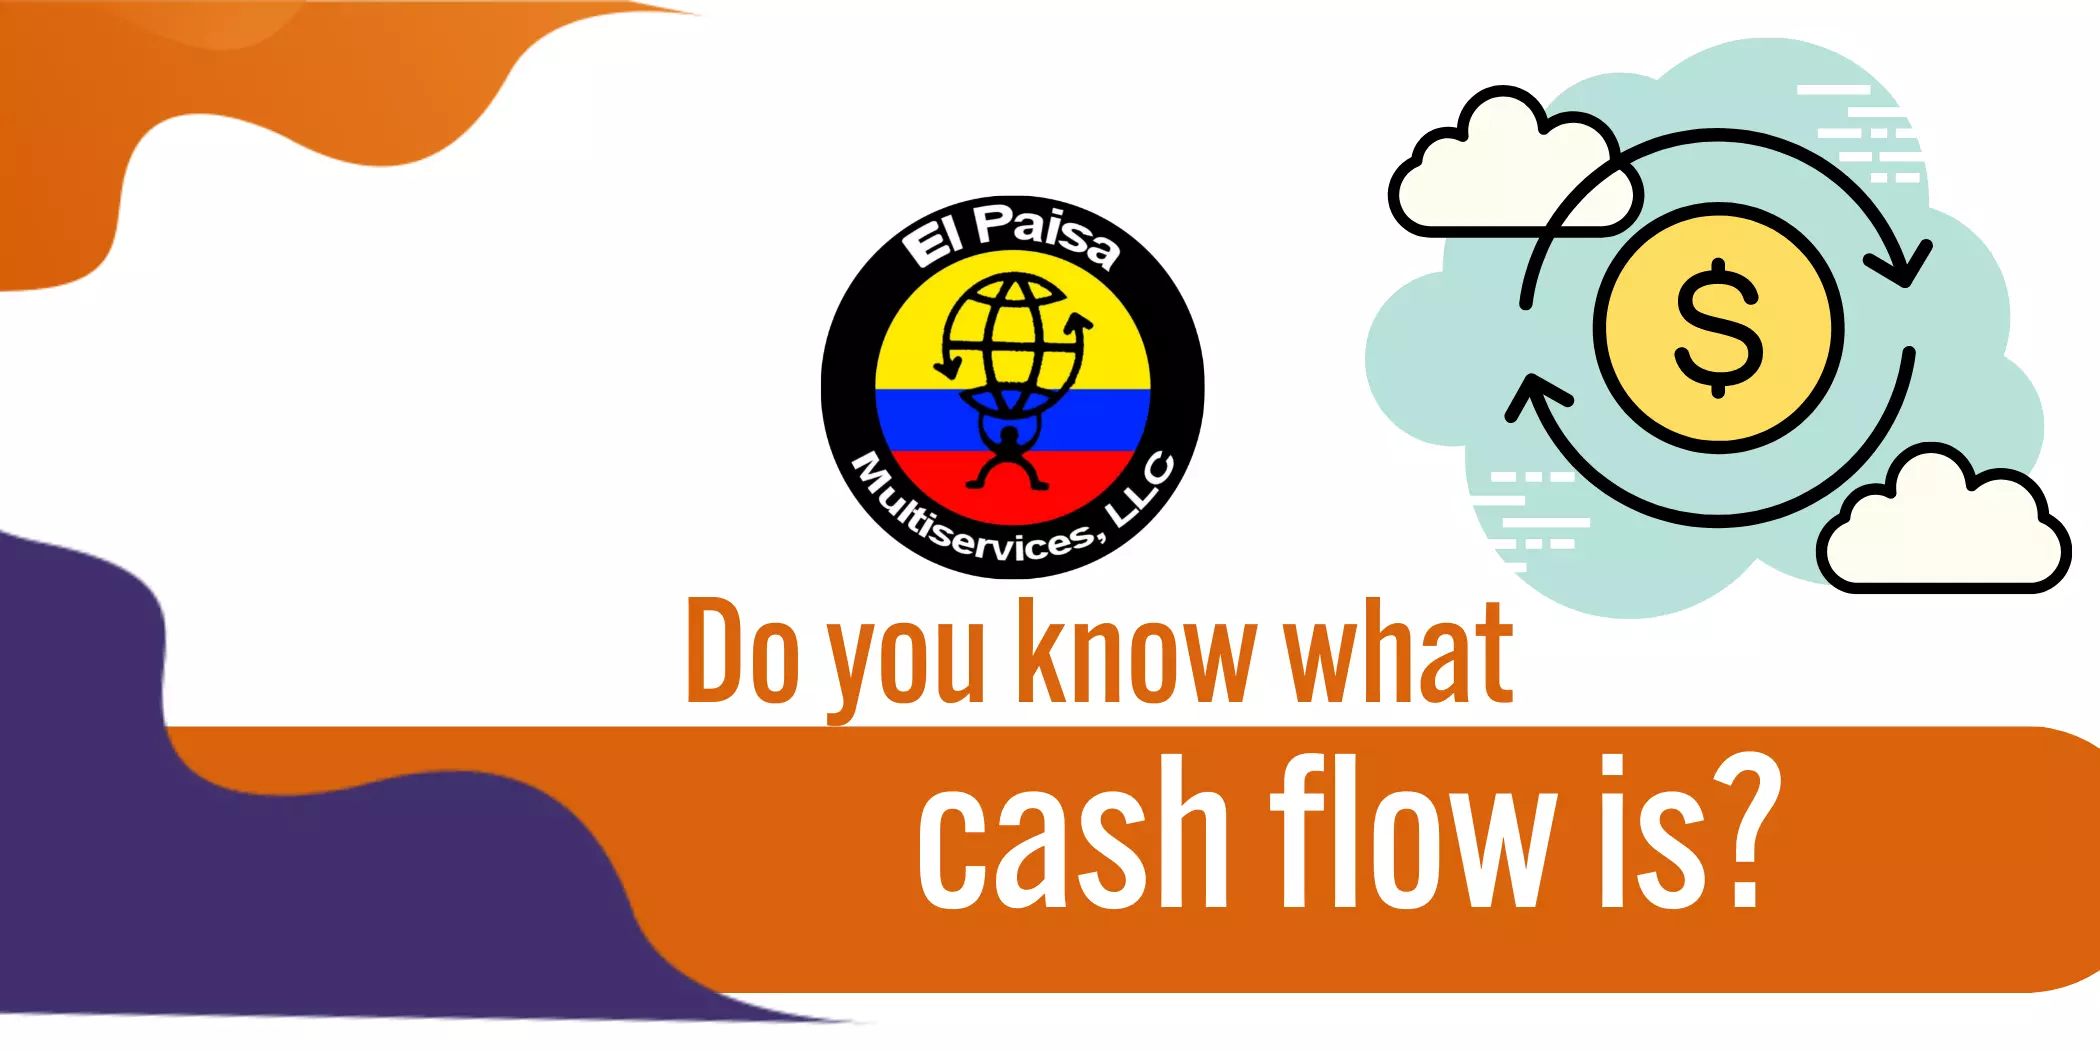 Do you know what cash flow is? 